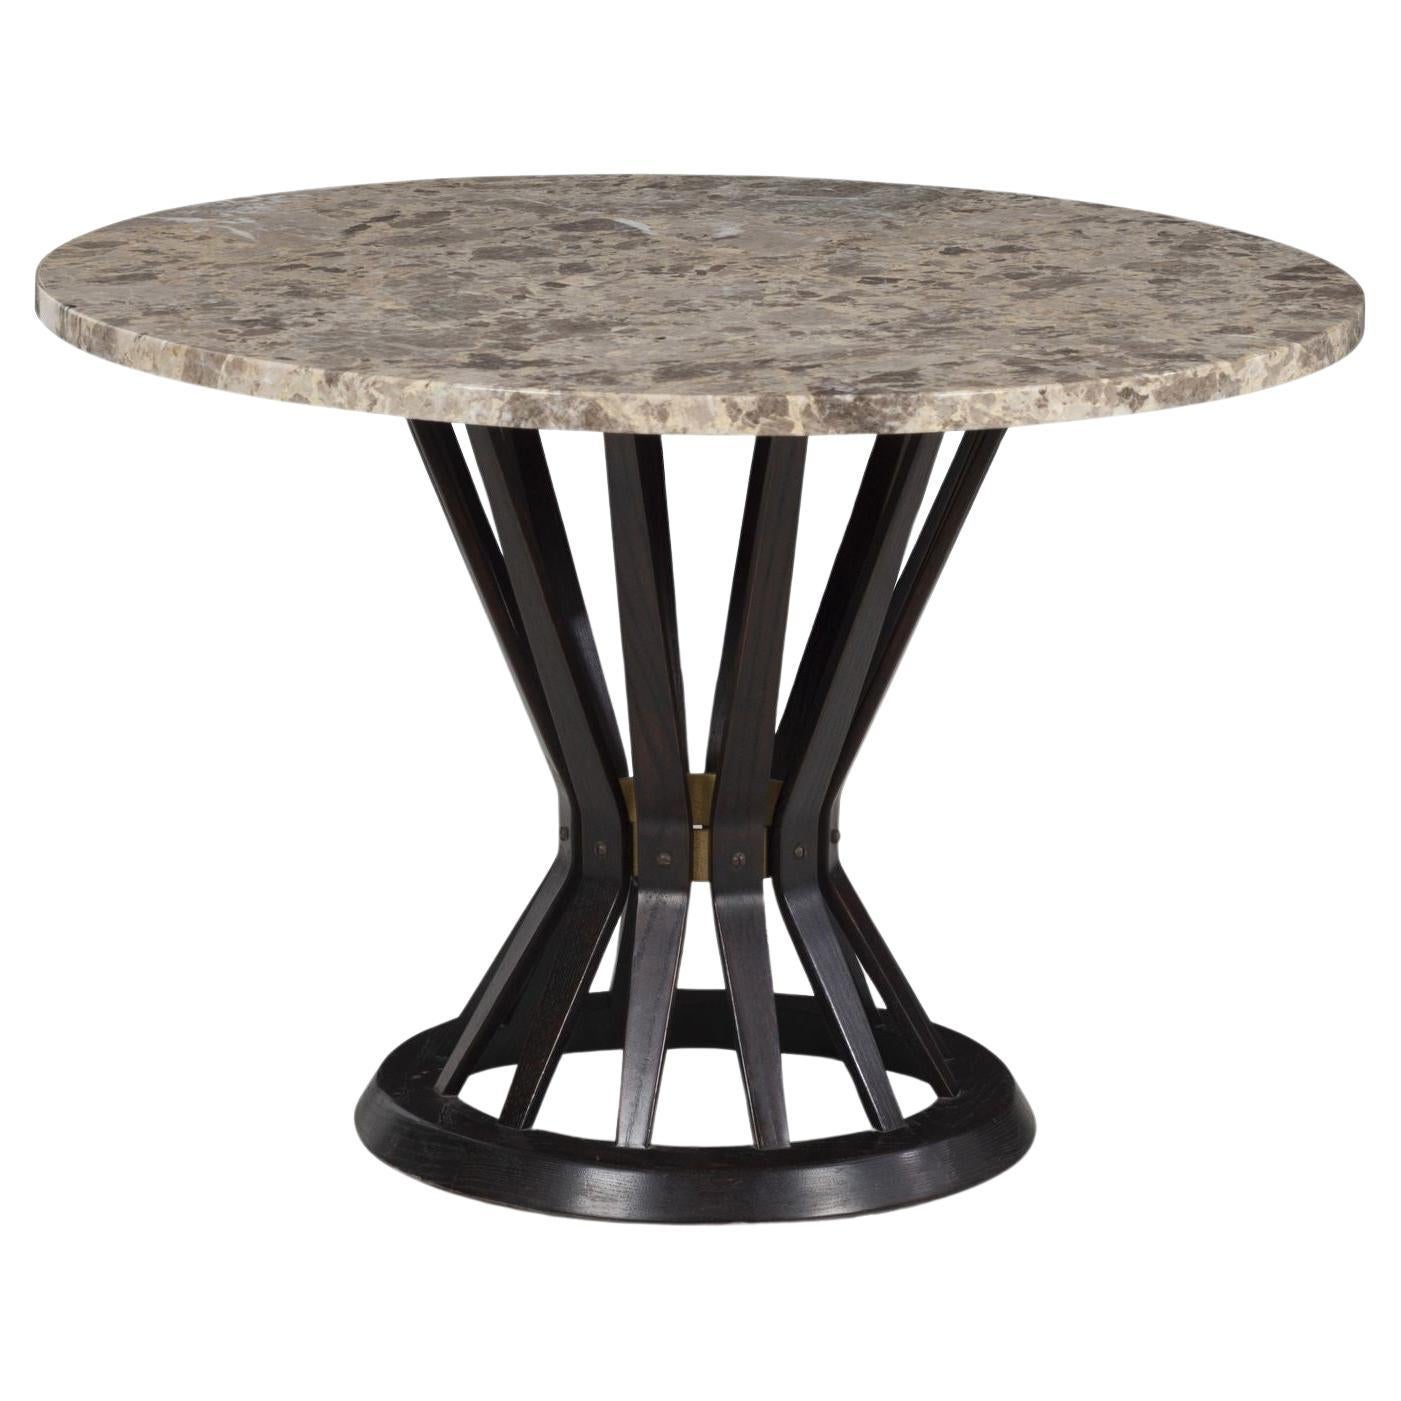 Edward Wormley for Dunbar Sheaf of Wheat Table, Terrazzo Marble Top For Sale